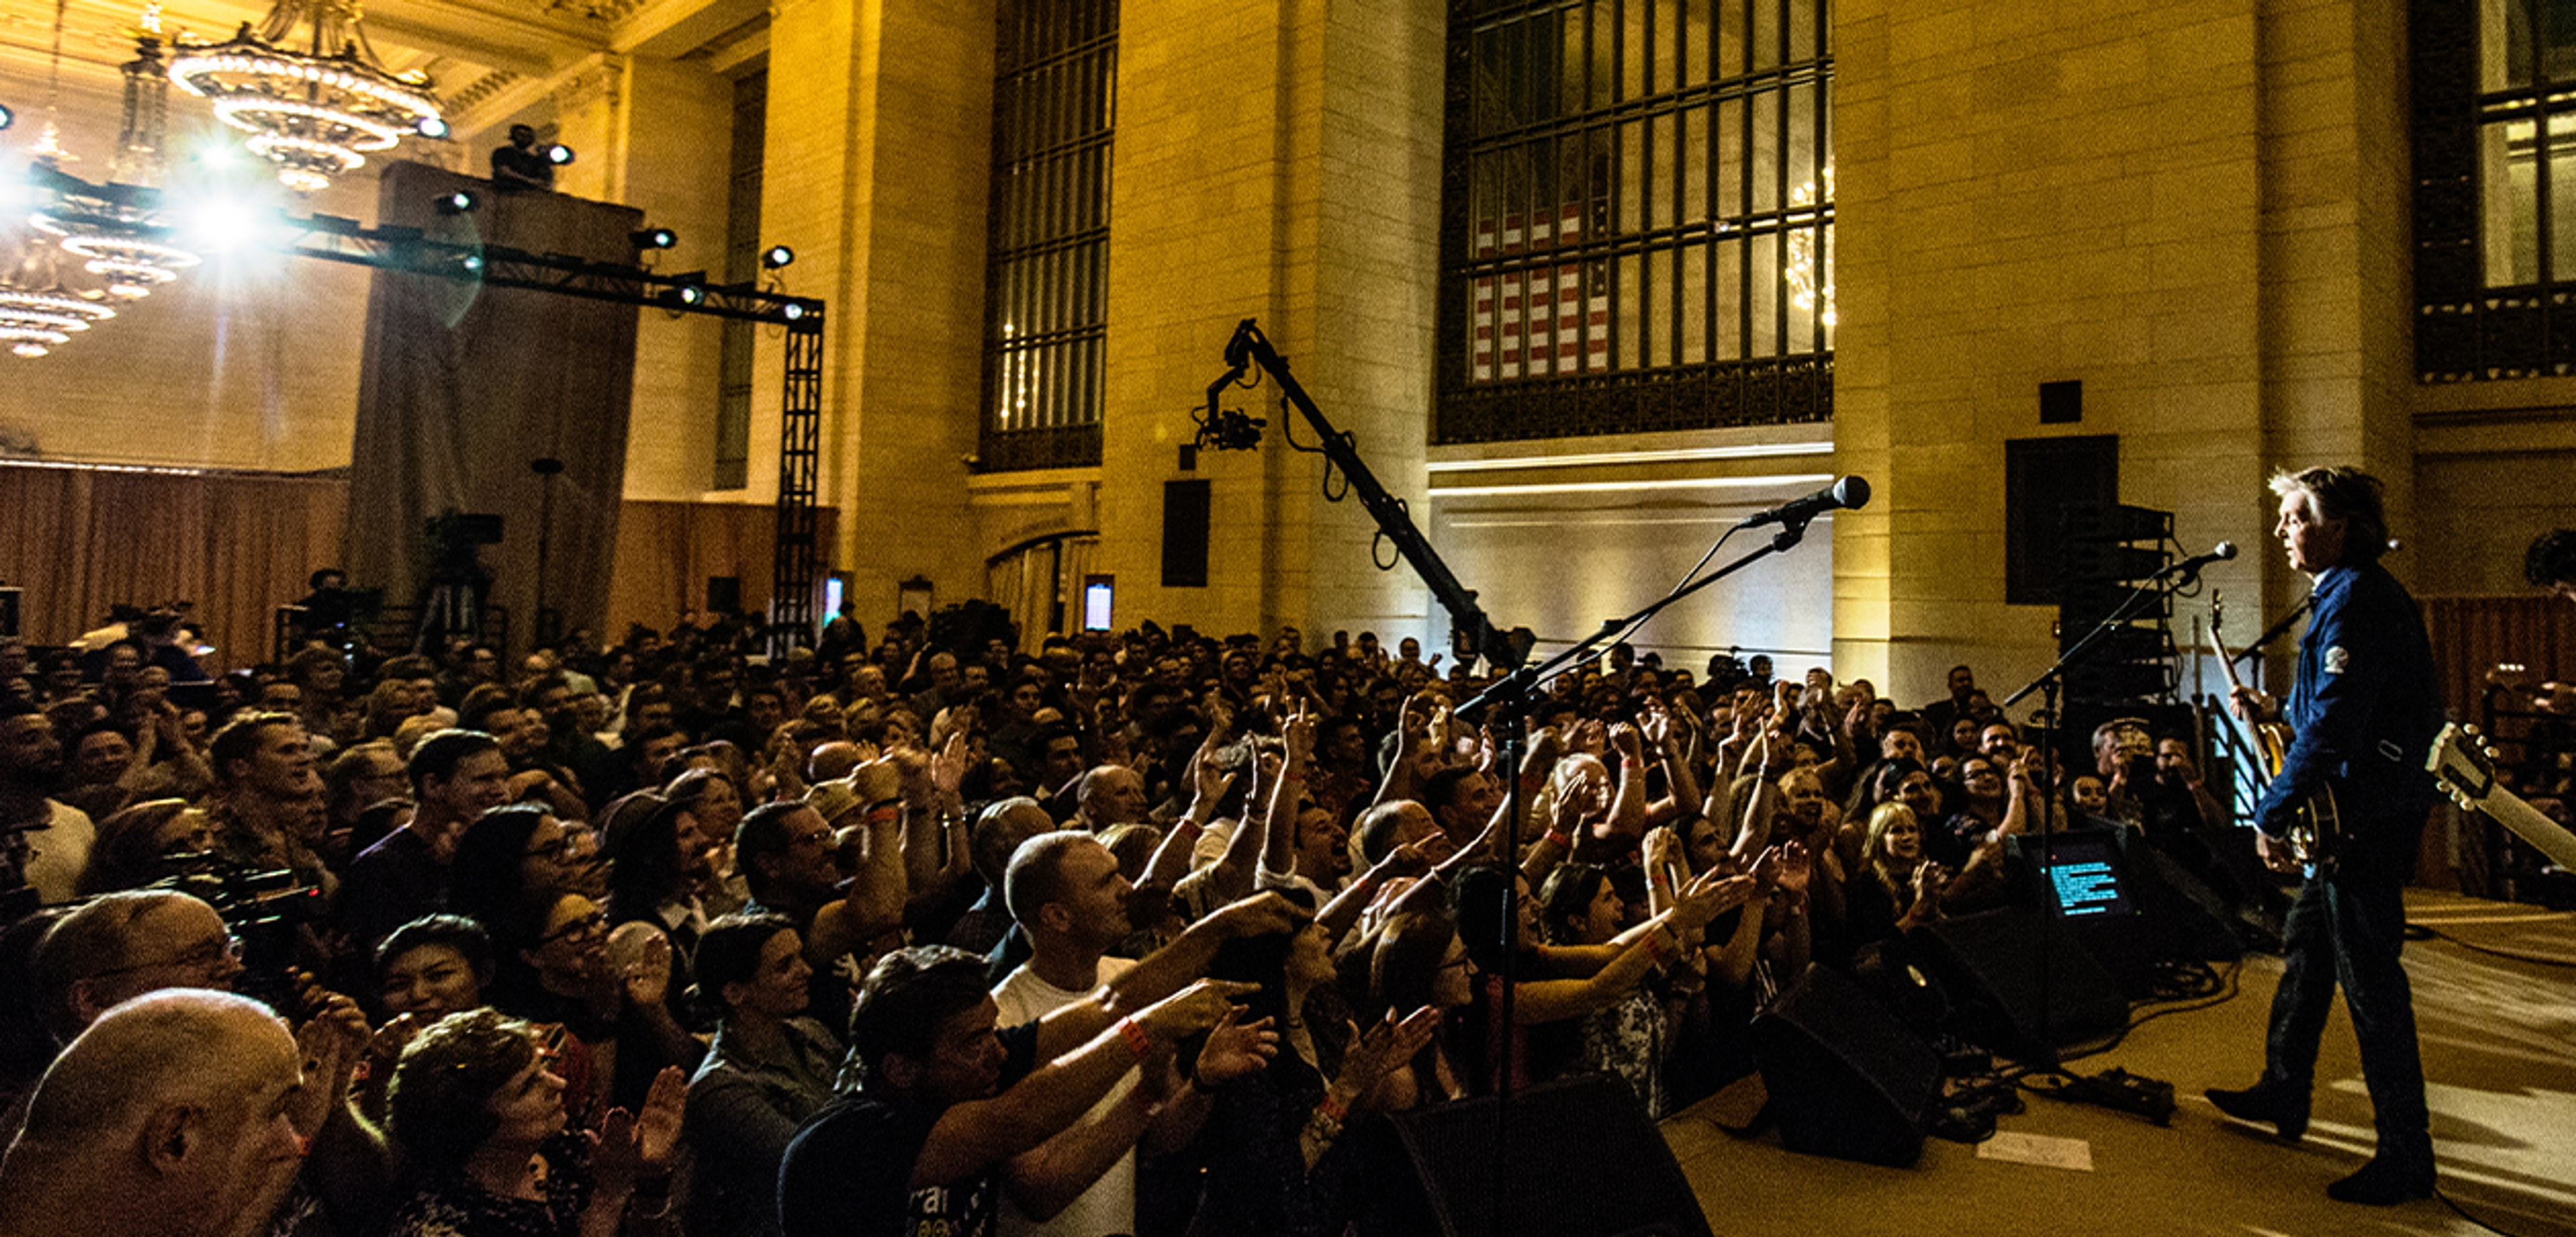 Paul performing at Grand Central Station in 2018